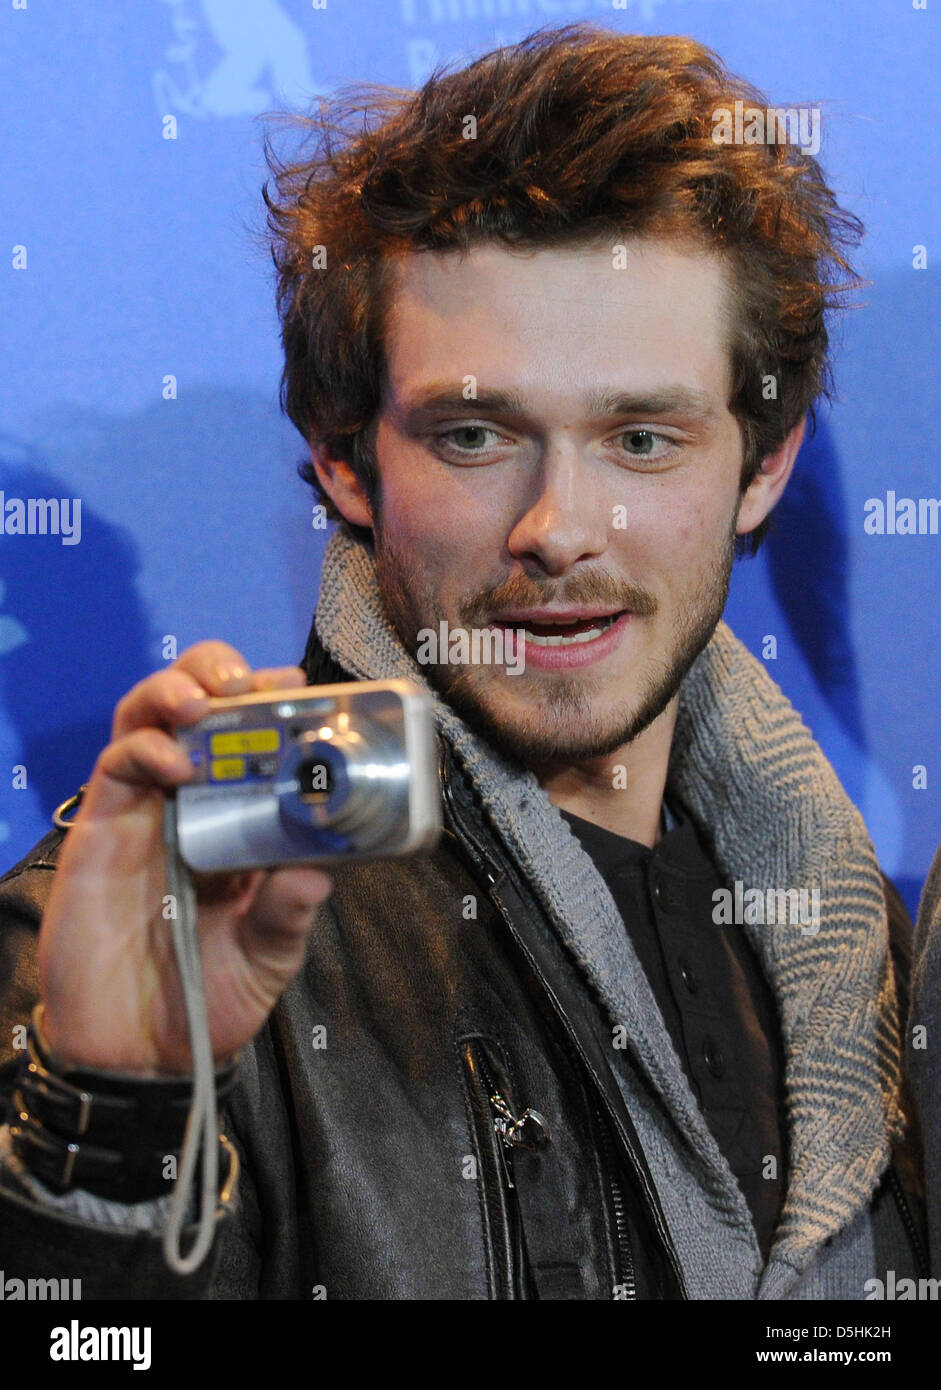 Russian actor Grigory Dobrygin takes pictures during the photocall of the film 'How I Ended This Summer' running in competition during the 60th Berlinale International Film Festival in Berlin, Germany, Wednesday, 17 February 2010. The festival runs until 21 Febuary 2010. Photo: Jens Kalaene dpa/lbn Stock Photo